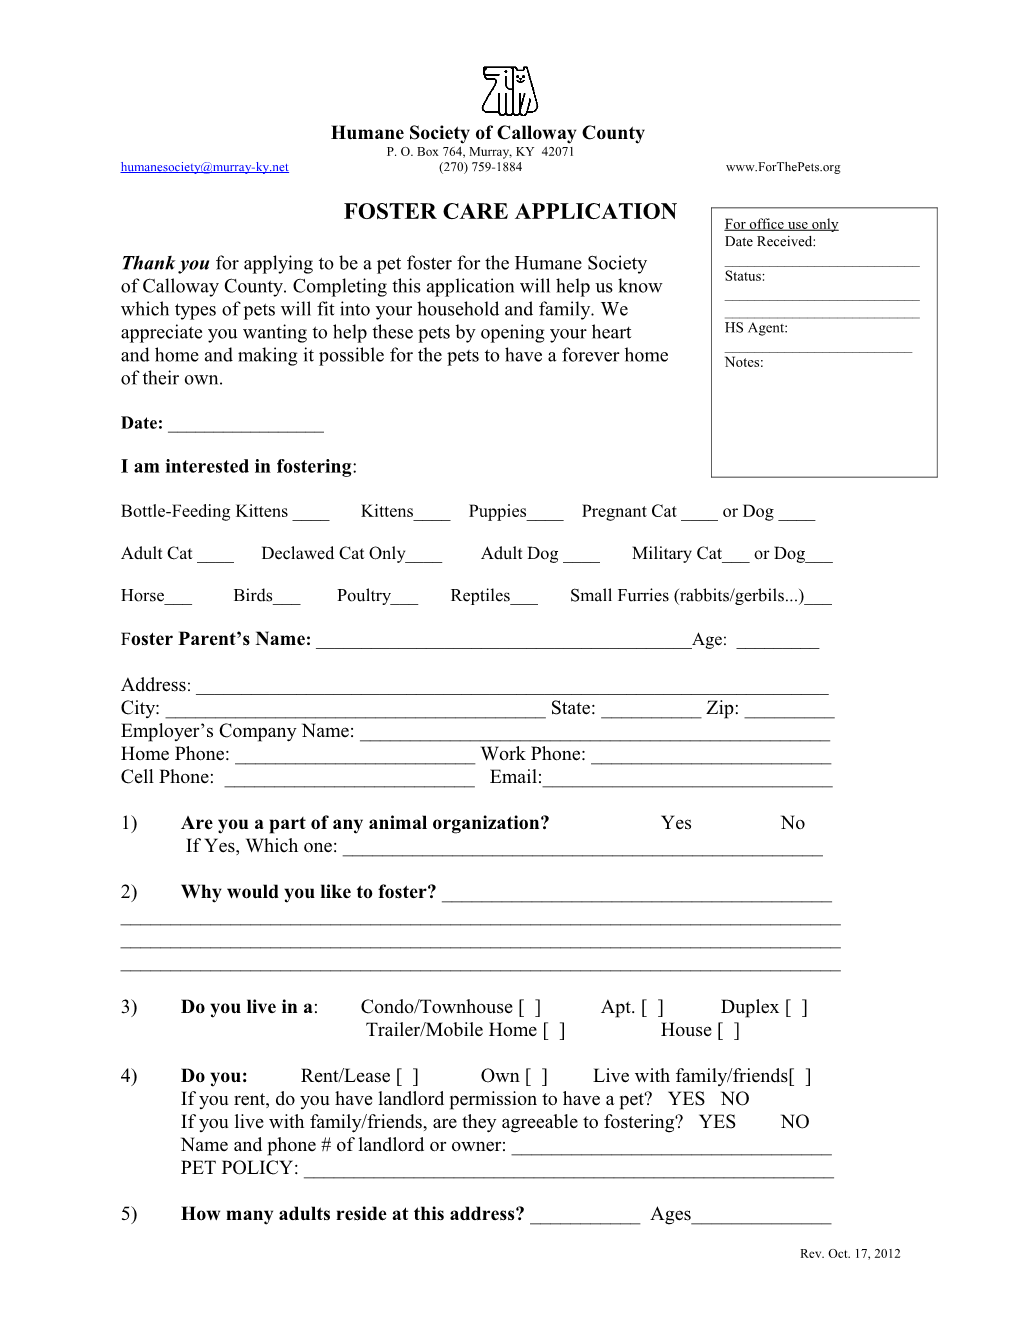 Foster Care Application s1